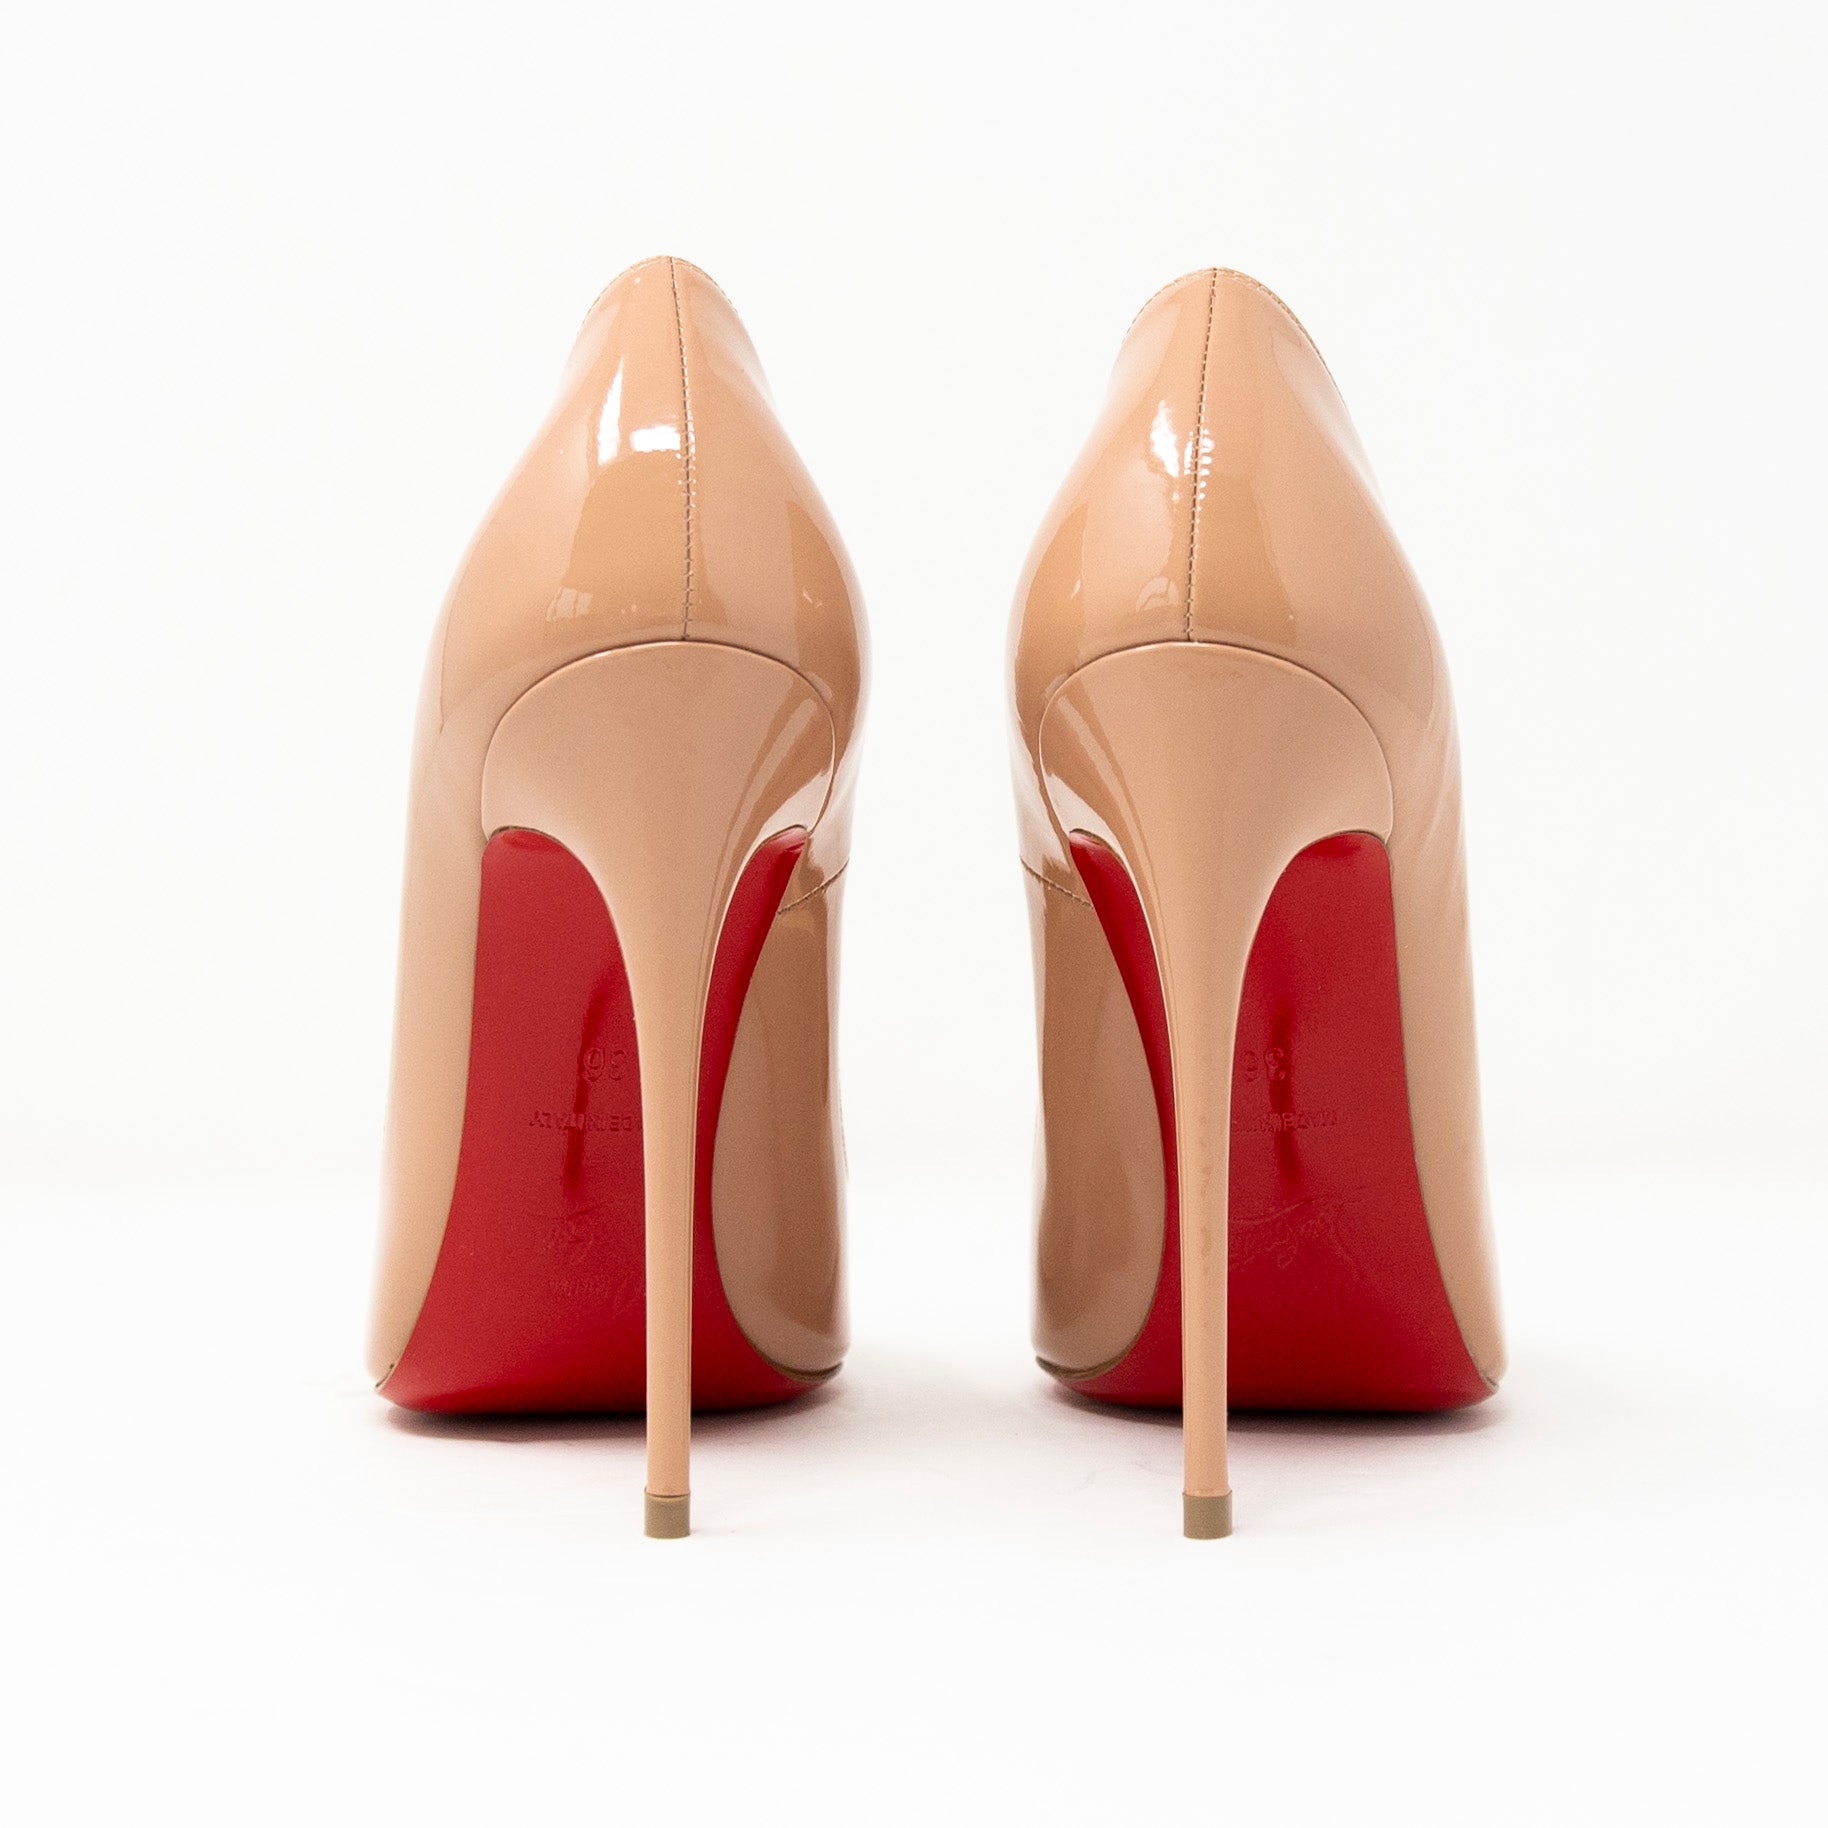 Christian Louboutin Nude Patent So Kate Pumps 36